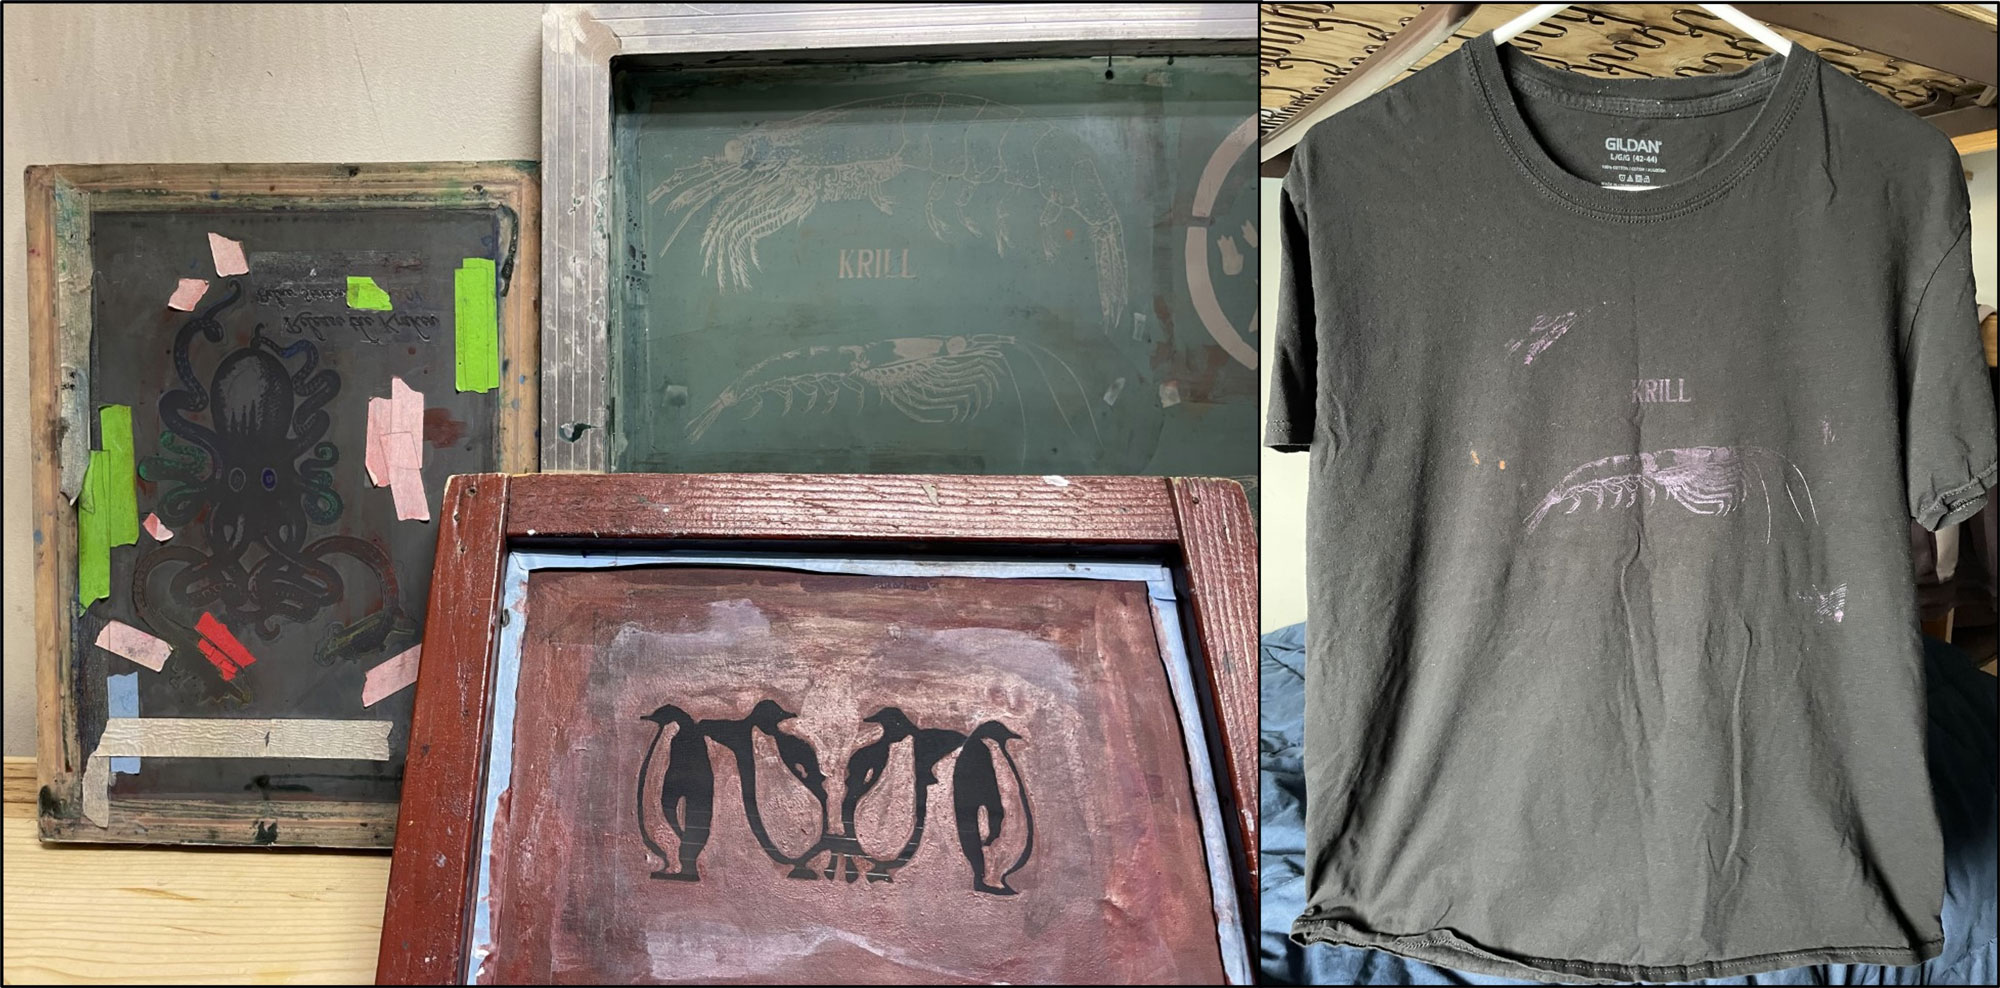 Composite showing three framed silkscreens – a squid, a quartet of penguins, and a krill alongside a gray t-shirt with purple printed krill.